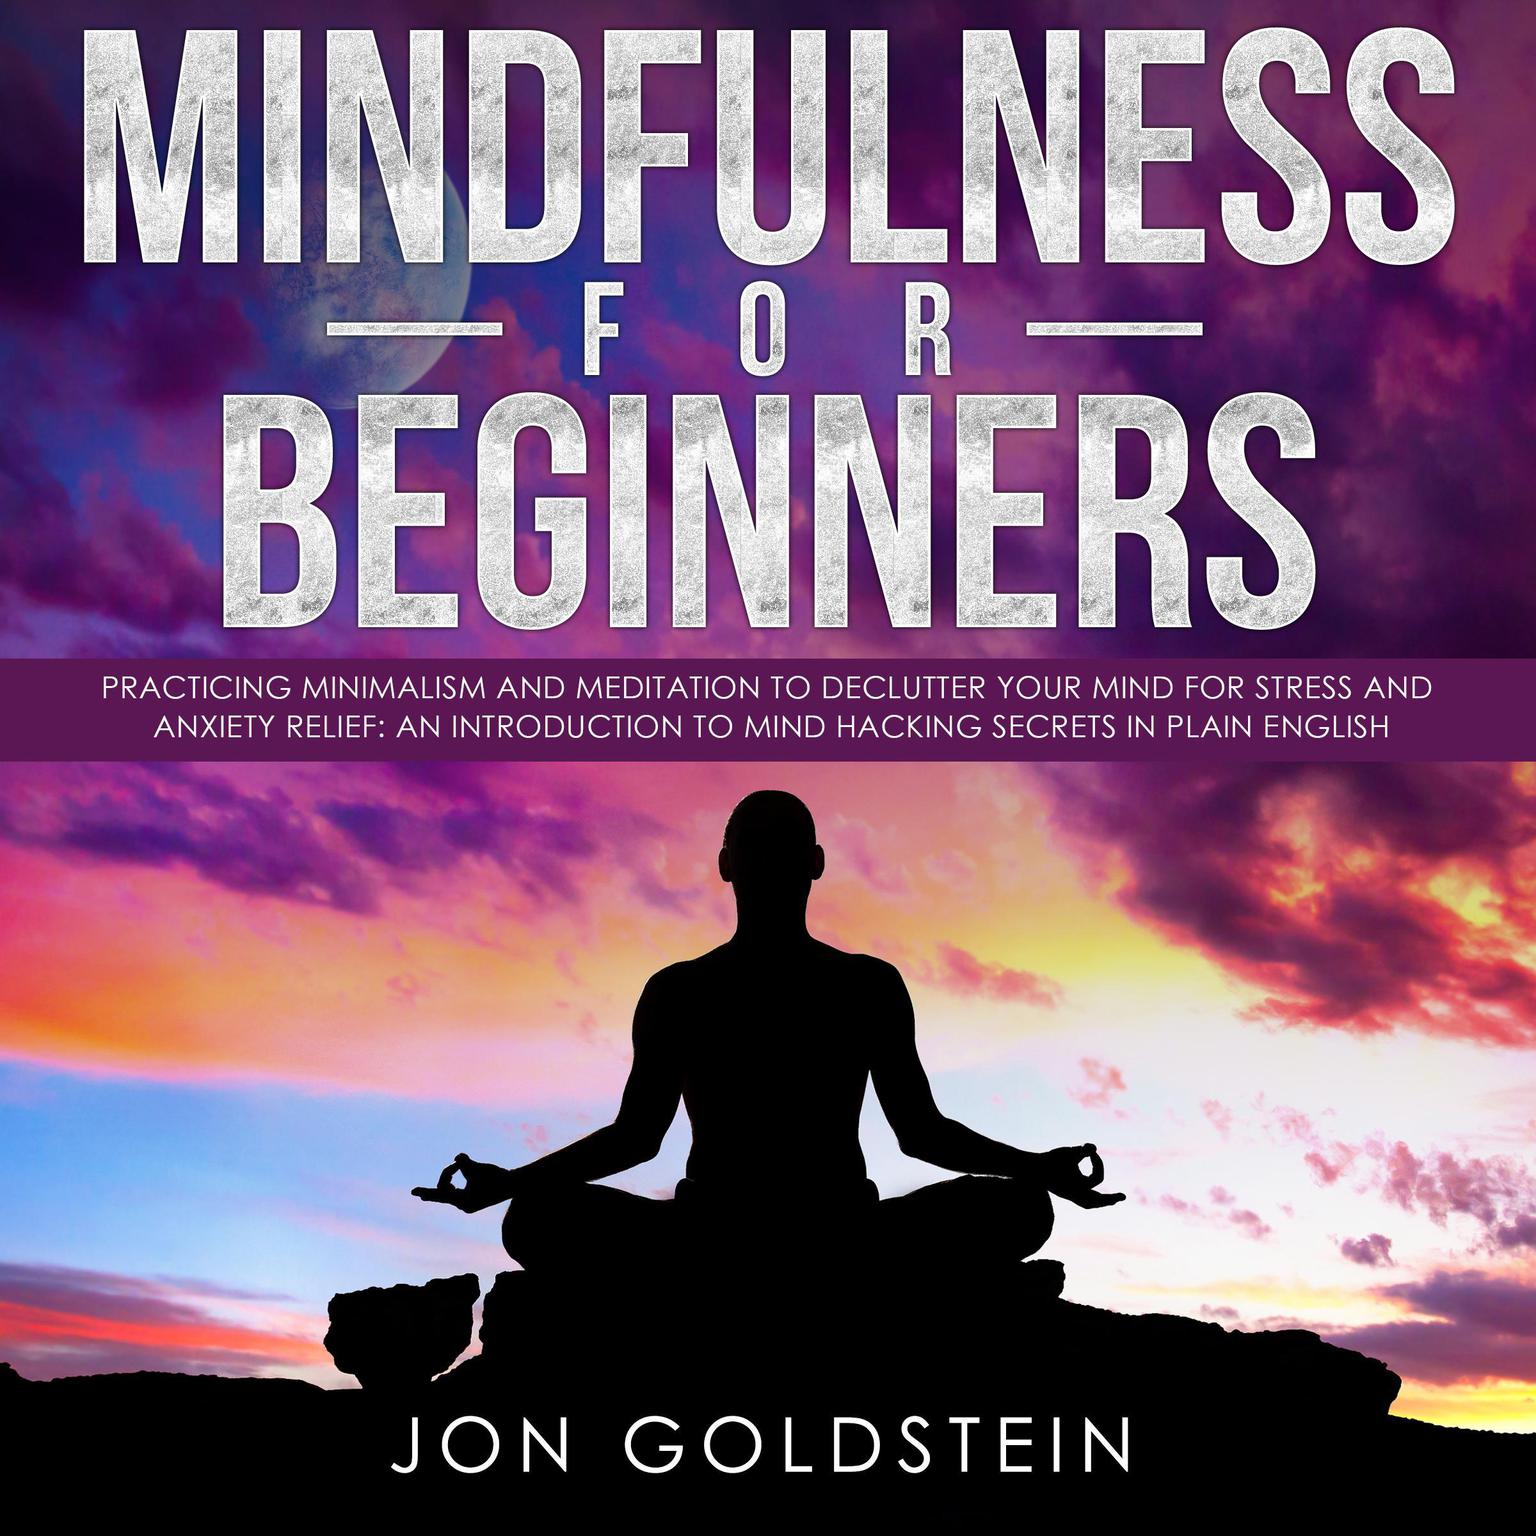 Mindfulness for Beginners: Practicing Minimalism and Meditation to Declutter Your Mind for Stress and Anxiety Relief: An Introduction to Mind Hacking Secrets in Plain English Audiobook, by Jon Goldstein